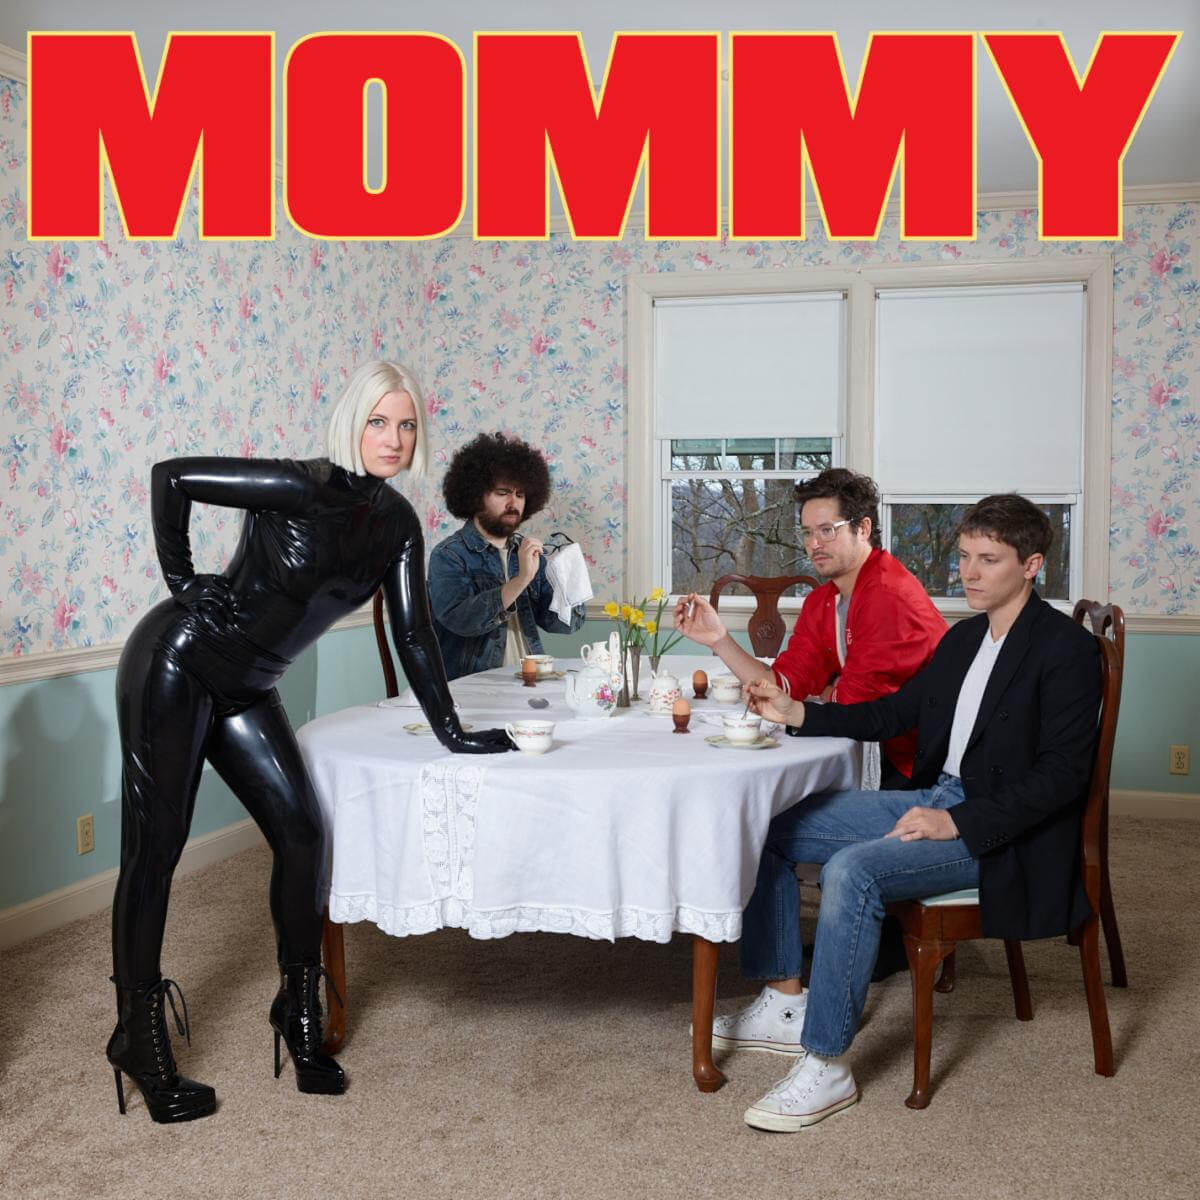 Be Your Own Pet Announce new album Mommy